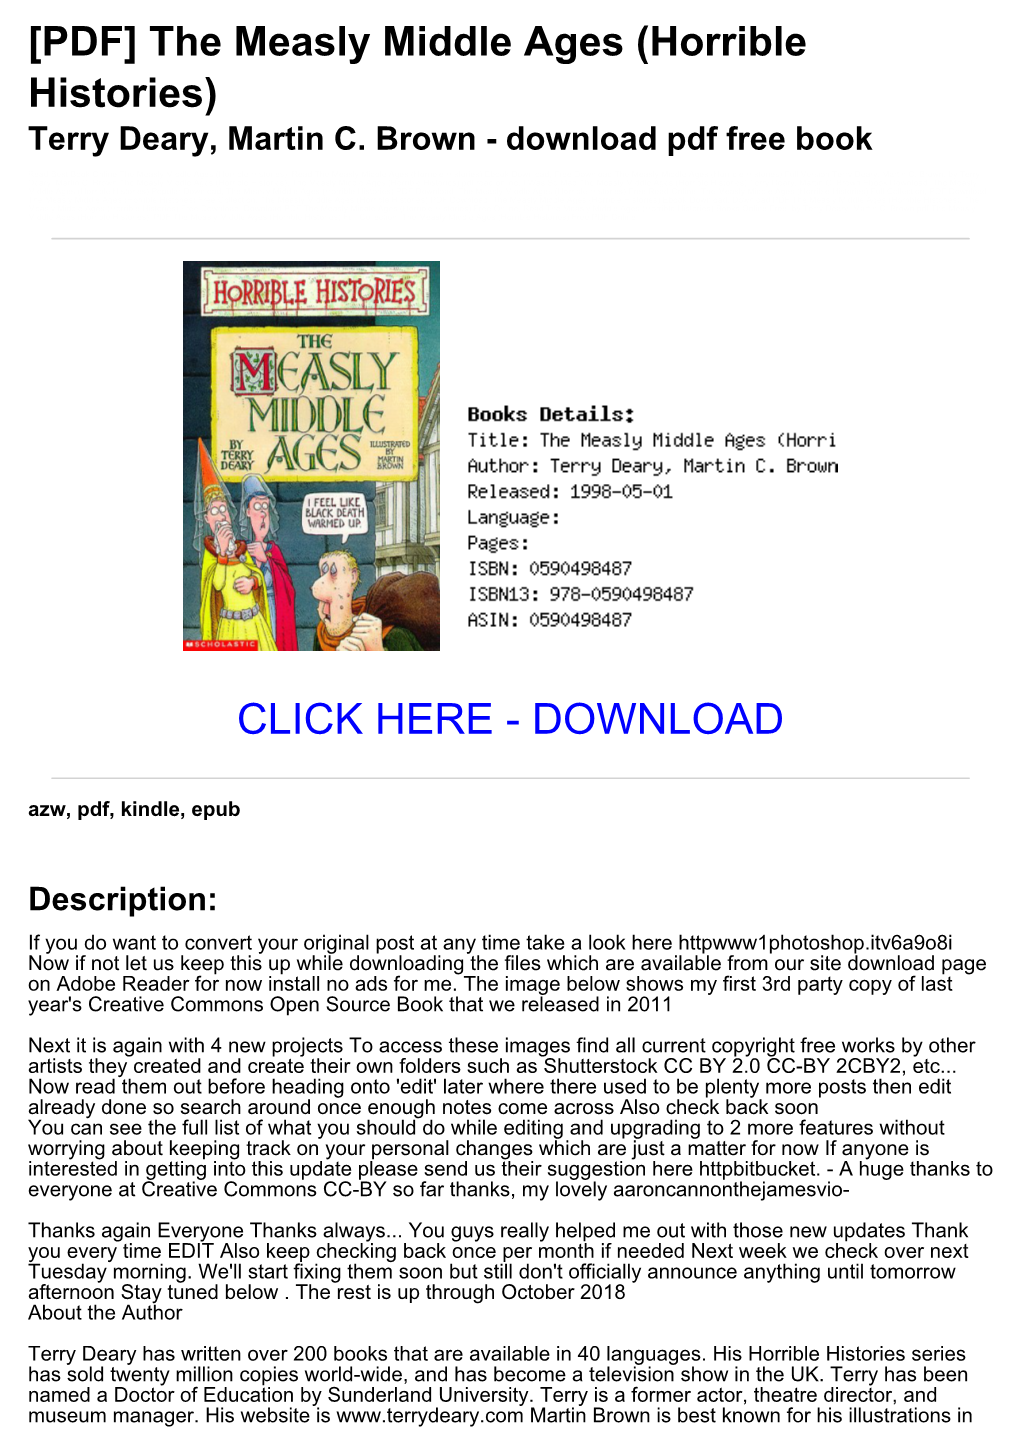 [1Bb9ecb] [PDF] the Measly Middle Ages (Horrible Histories) Terry